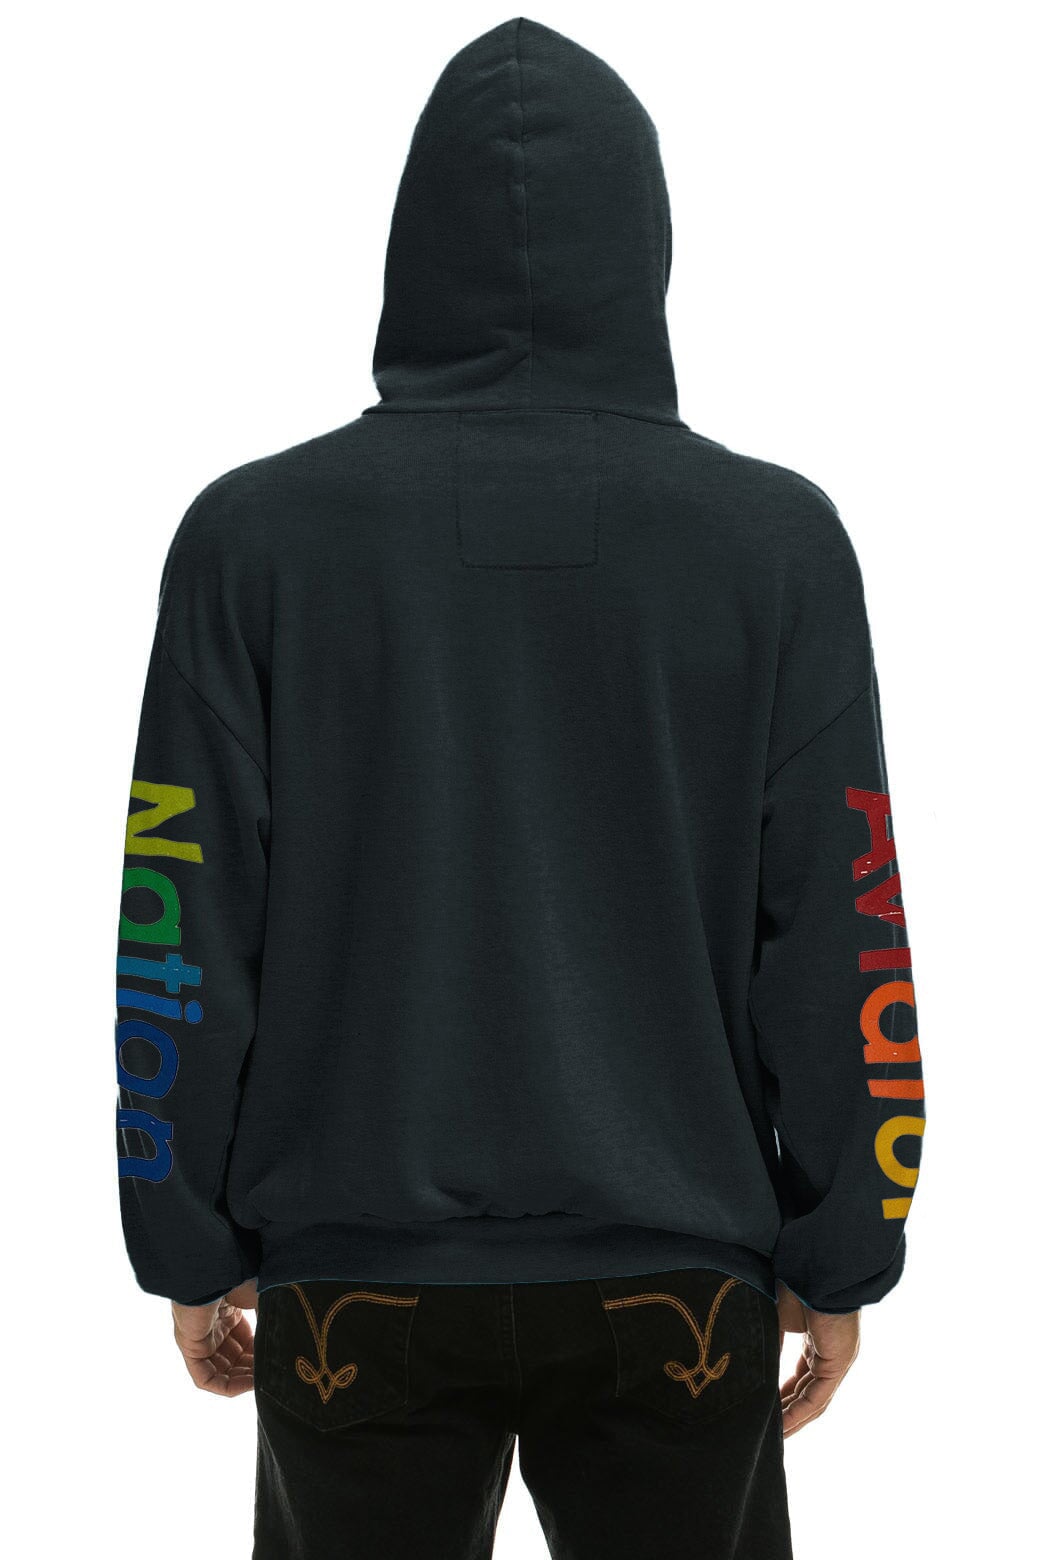 AVIATOR NATION SAN FRANCISCO RELAXED PULLOVER HOODIE - CHARCOAL Hoodie Aviator Nation 